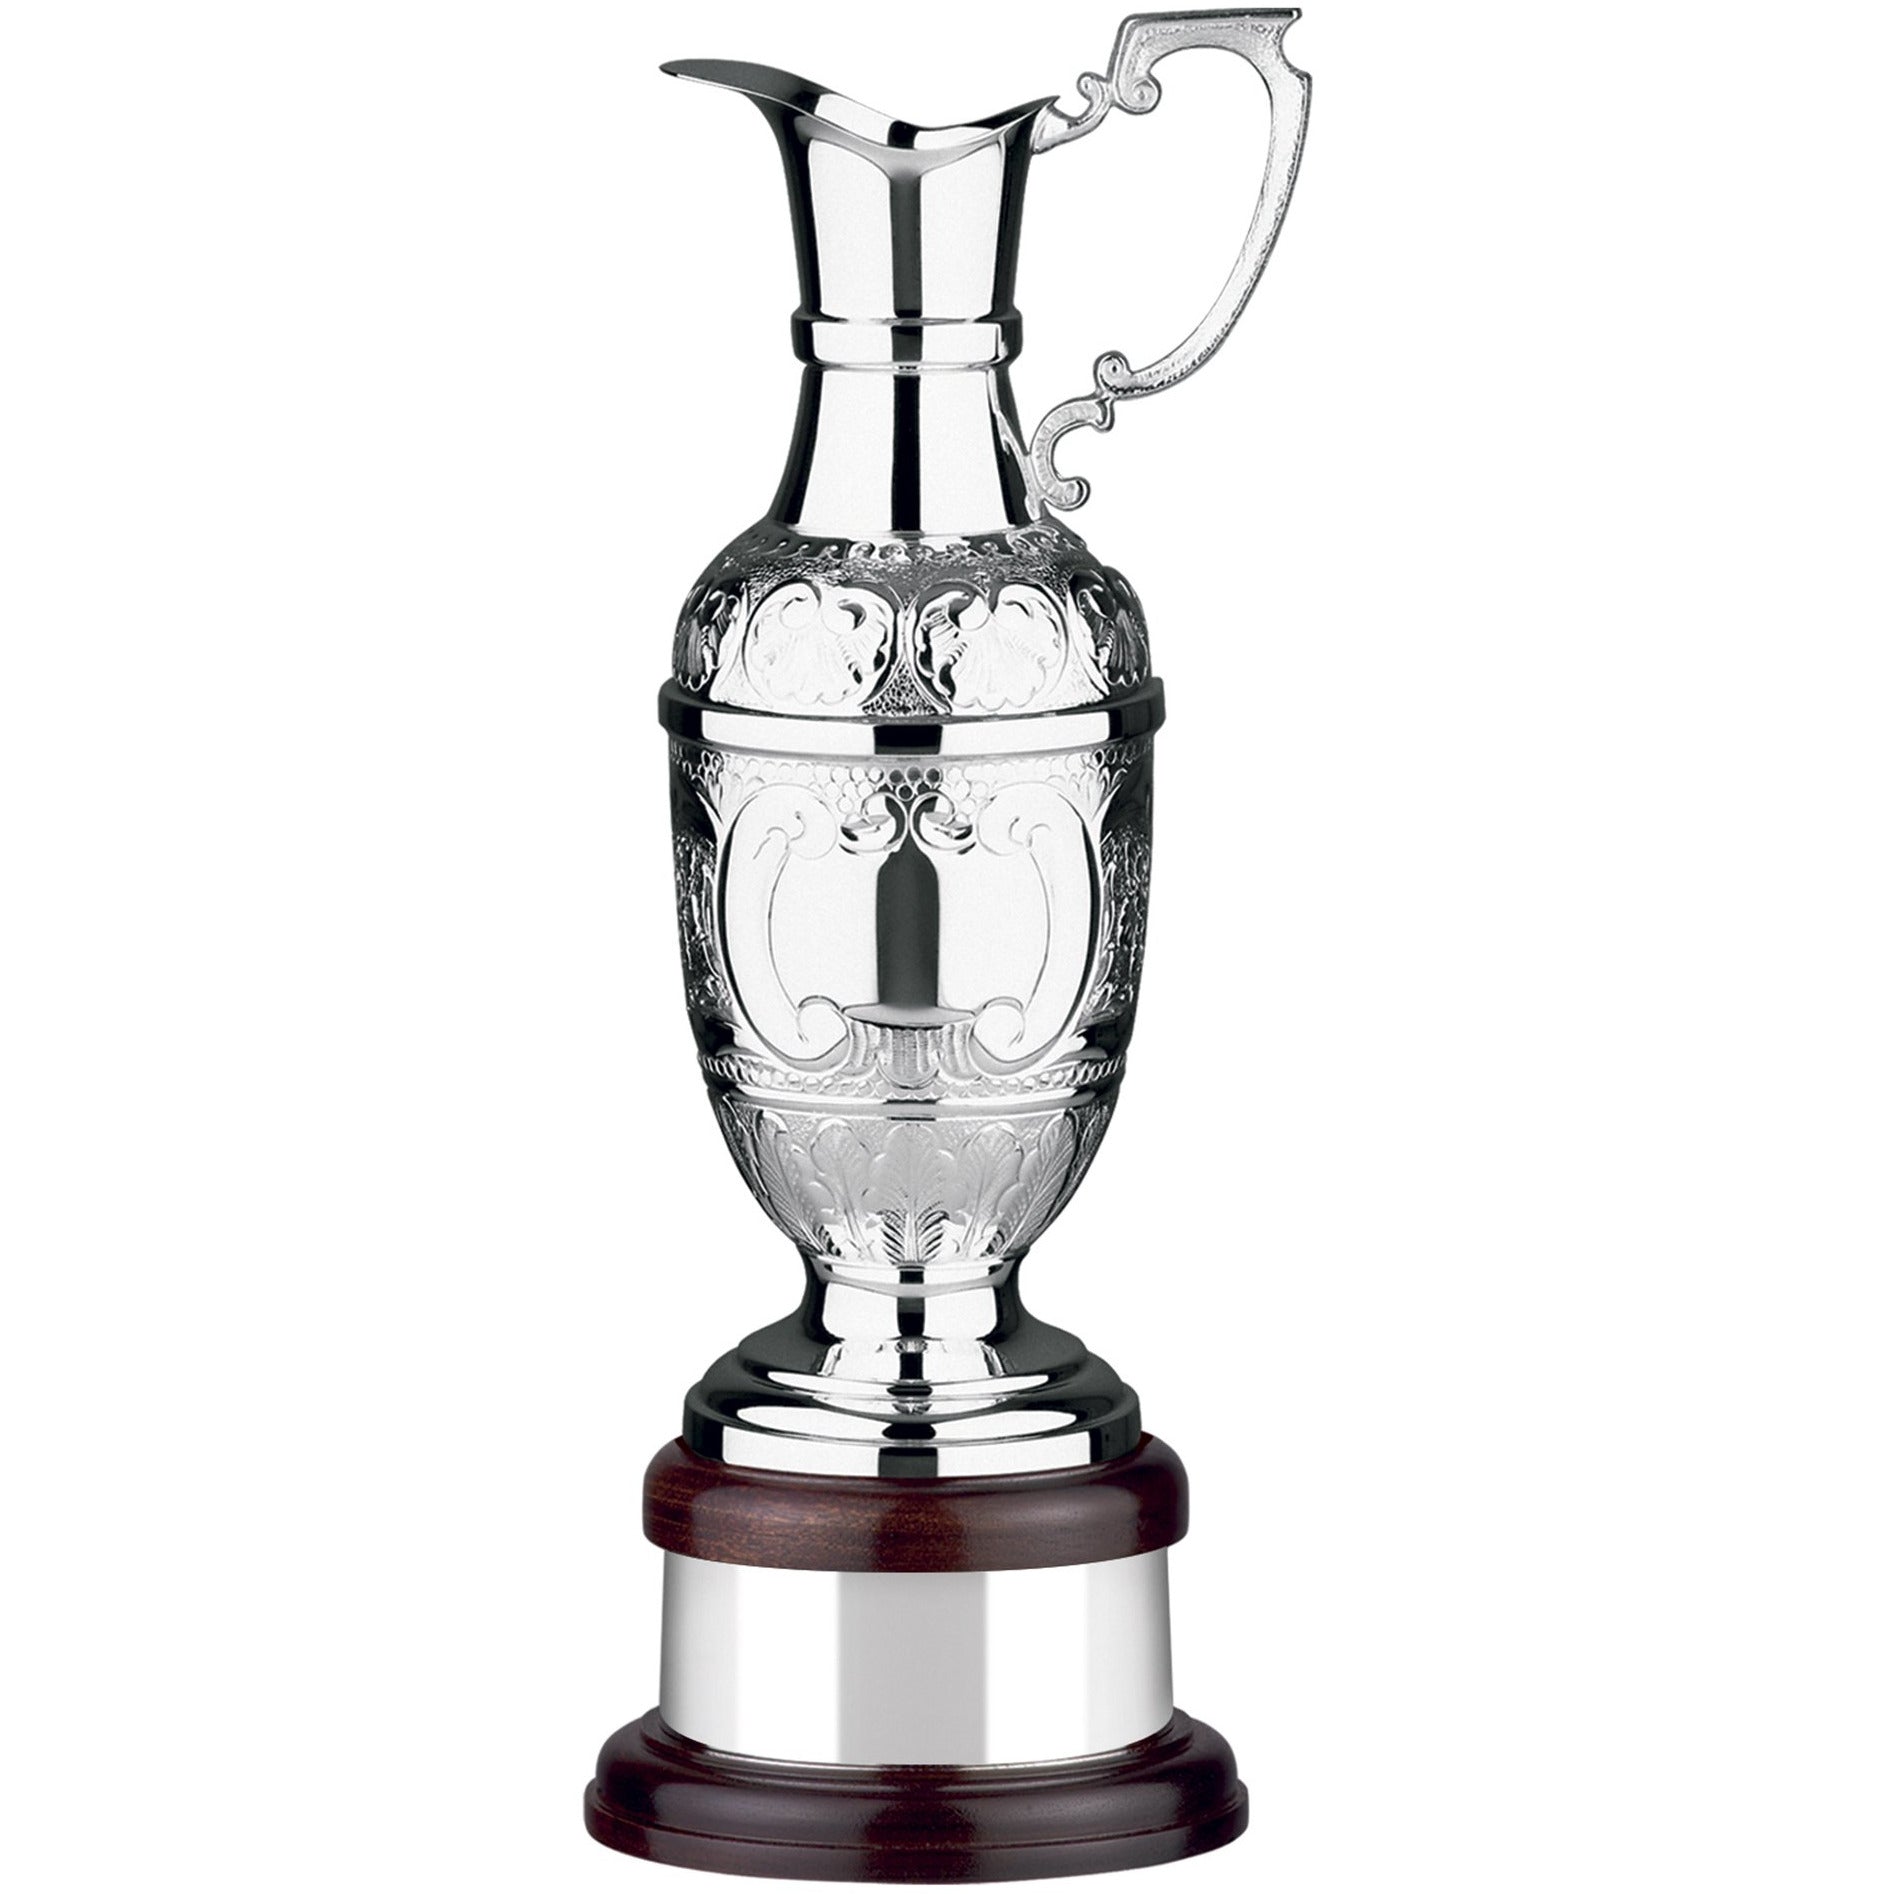 Supreme Hand-Chased Golf Claret Jug Award - Silver Plated